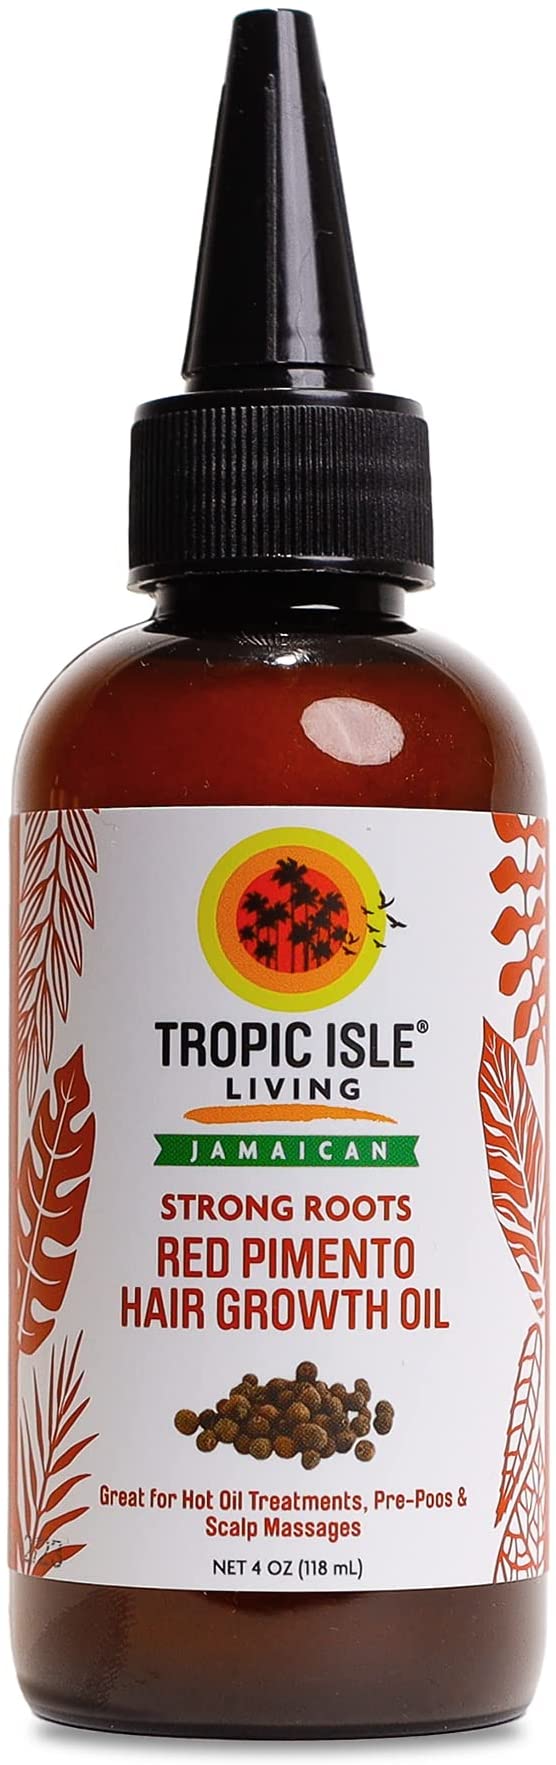 Tropic Isle Strong Roots Red Pimento Hair Growth Oil